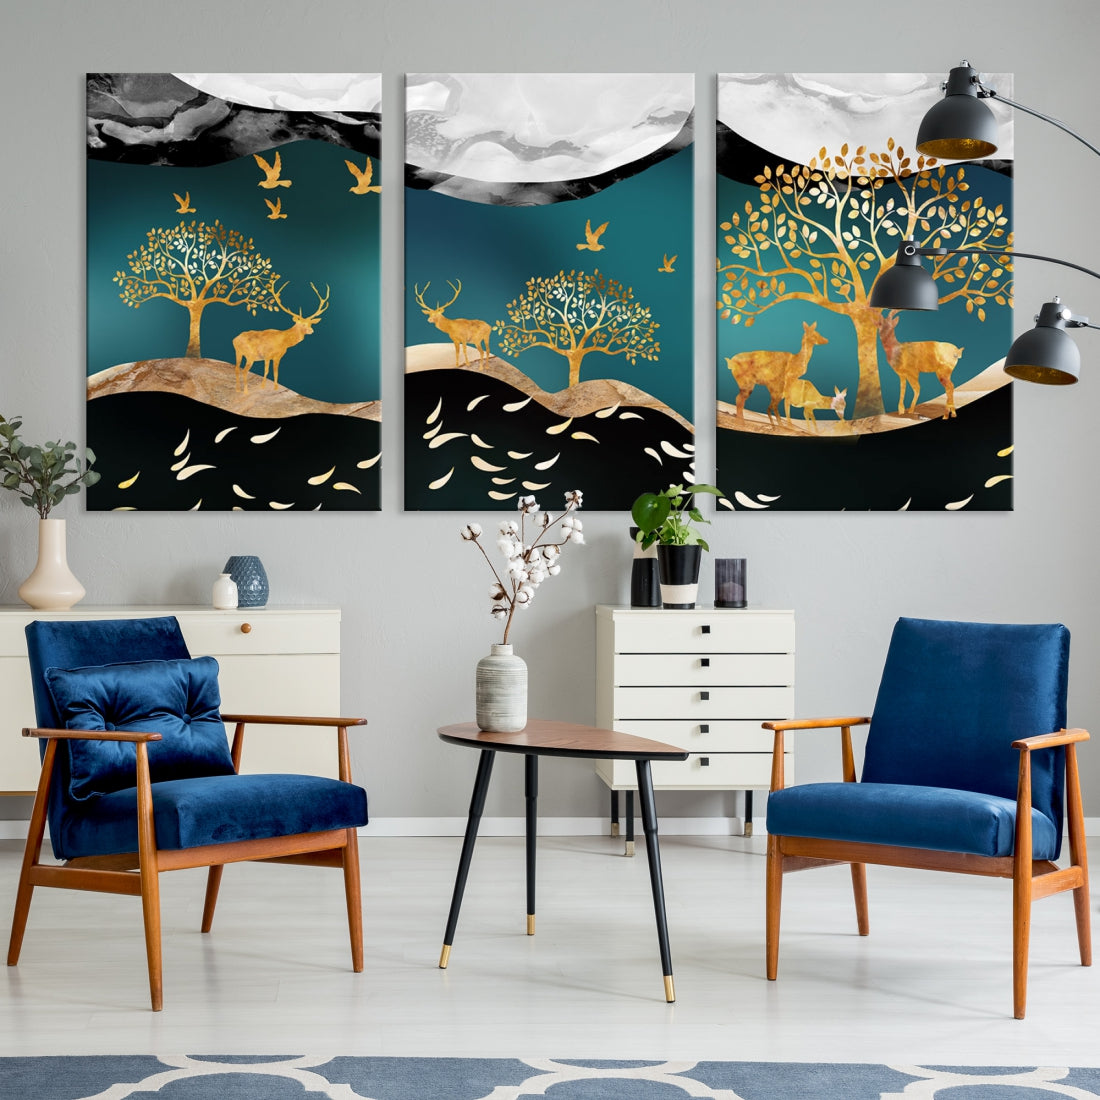 Marvellous Deer Canvas Painting Extra Large Wall Art Multi Panel Original Canvas Framed Ready to Hang Canvas Print Artwork for Living Room Bedroom Music Kids Room Home Wall Decor